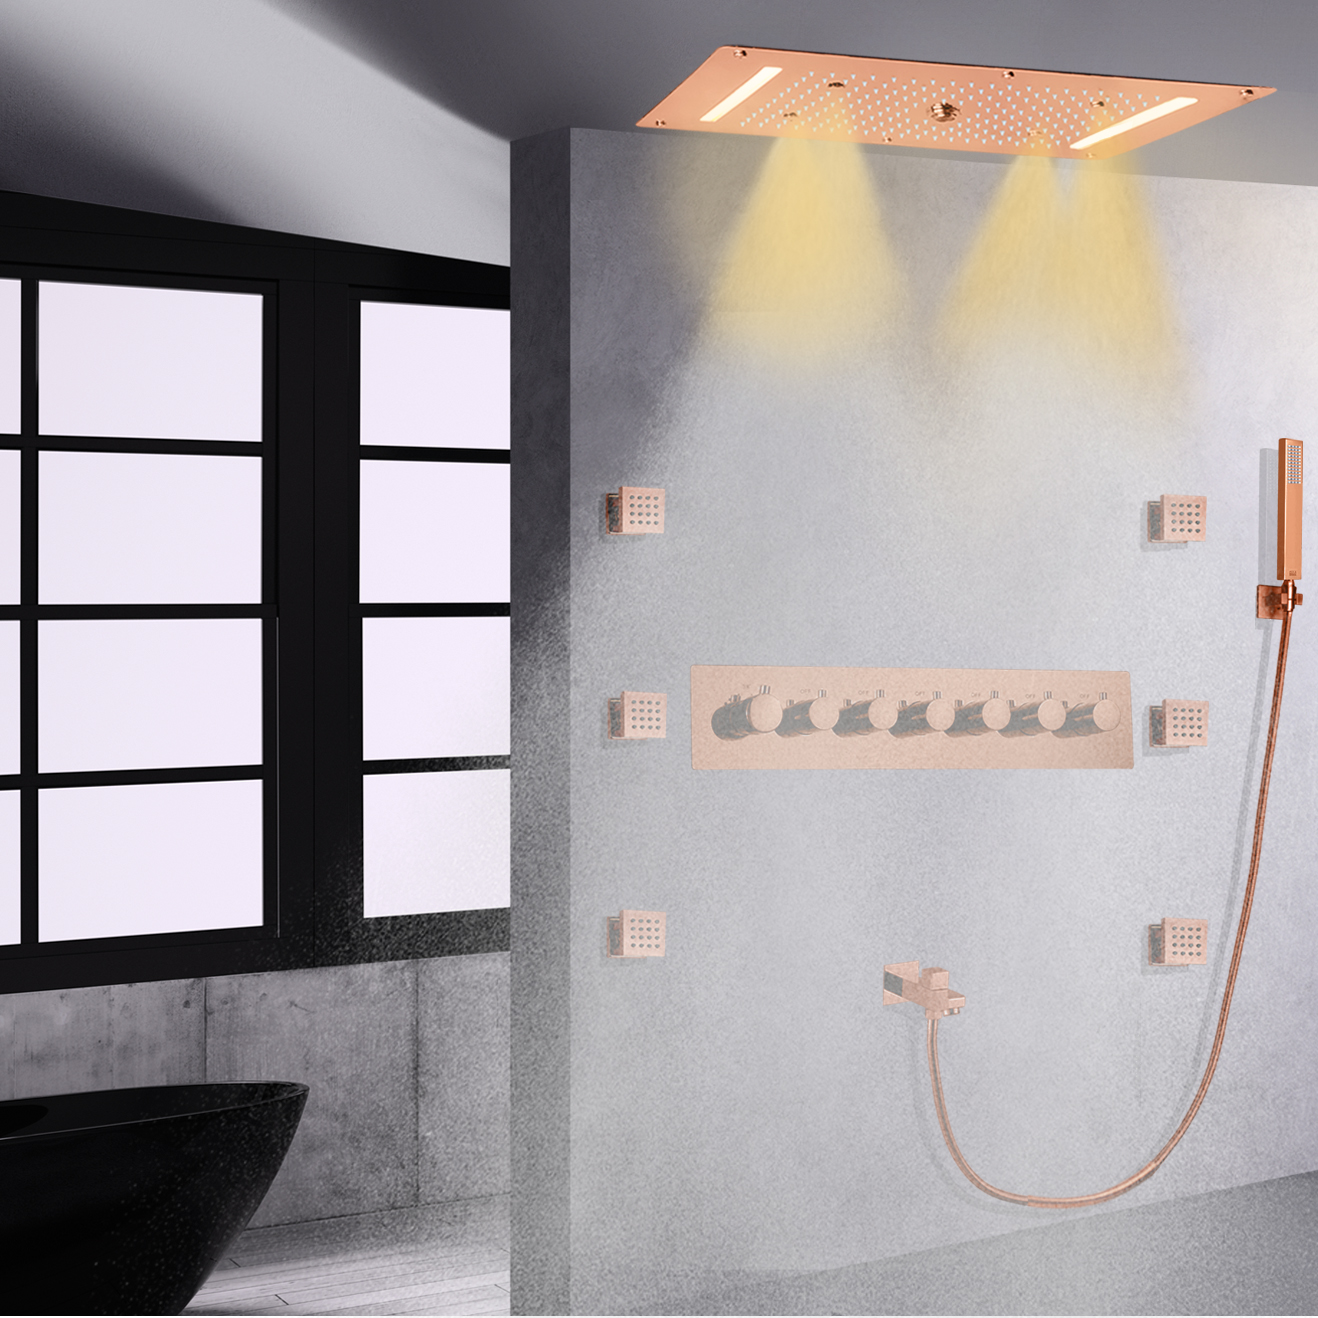 Rose Gold Embedded Bath Ceiling Shower Mixer Rainfall Waterfall Shower Tub Spout Combo Set